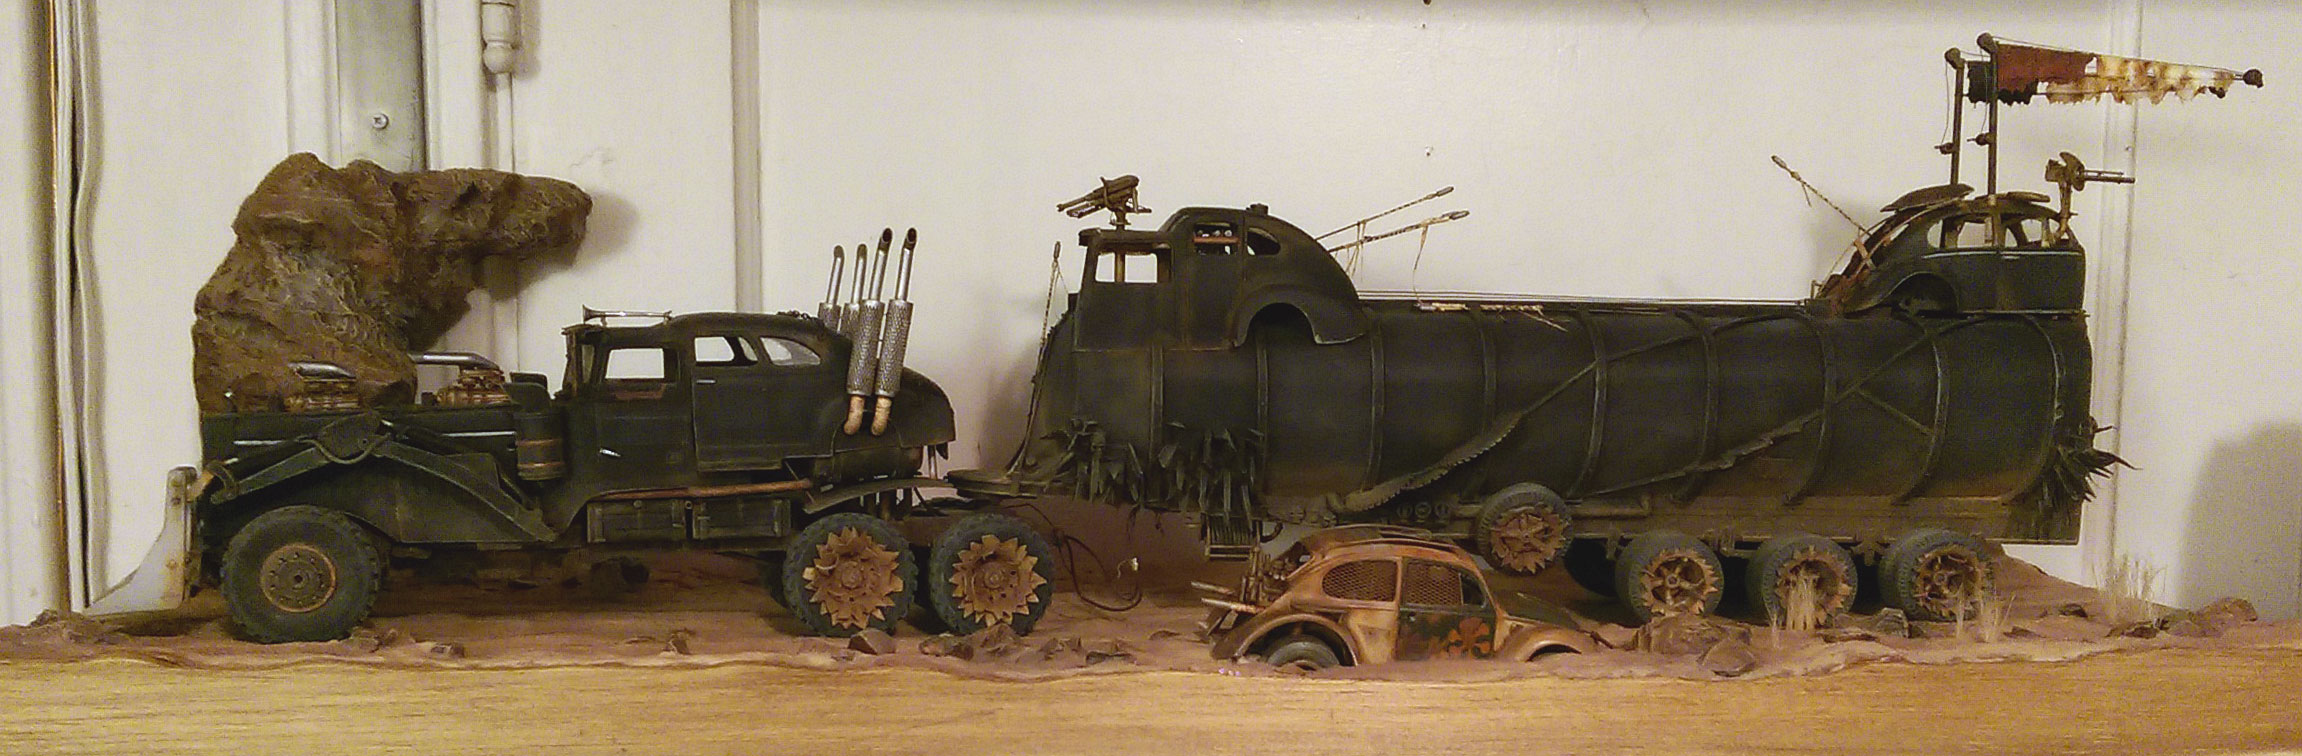 Mad Max Fury Road The War Rig 1 25 Scale Kit Bash Build Rpf Costume And Prop Maker Community